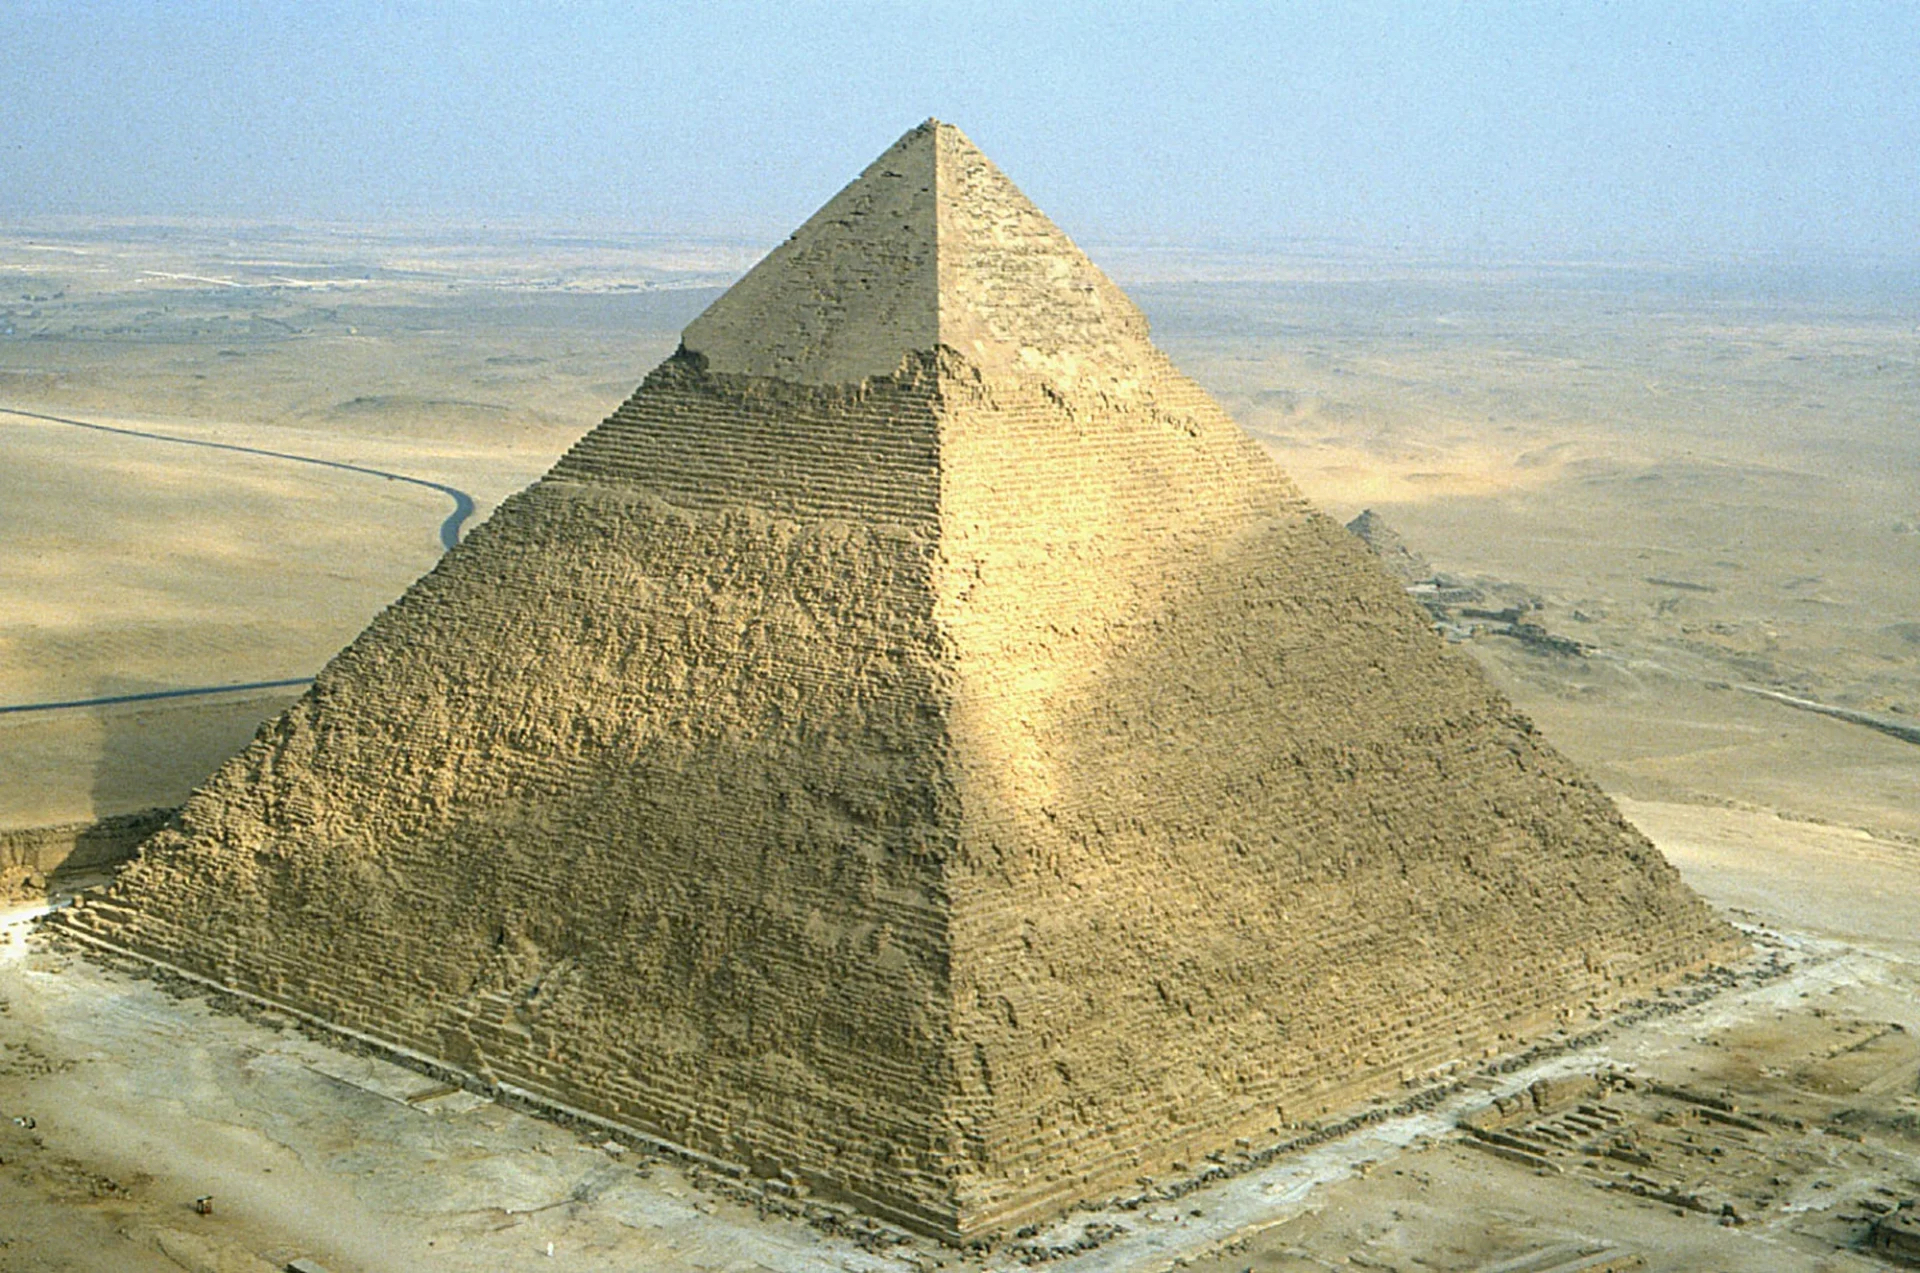 A photo of the Great Pyramid of Giza in Egypt, the oldest and largest of the three pyramids in the Giza pyramid complex, surrounded by a desert landscape and a hazy blue sky.